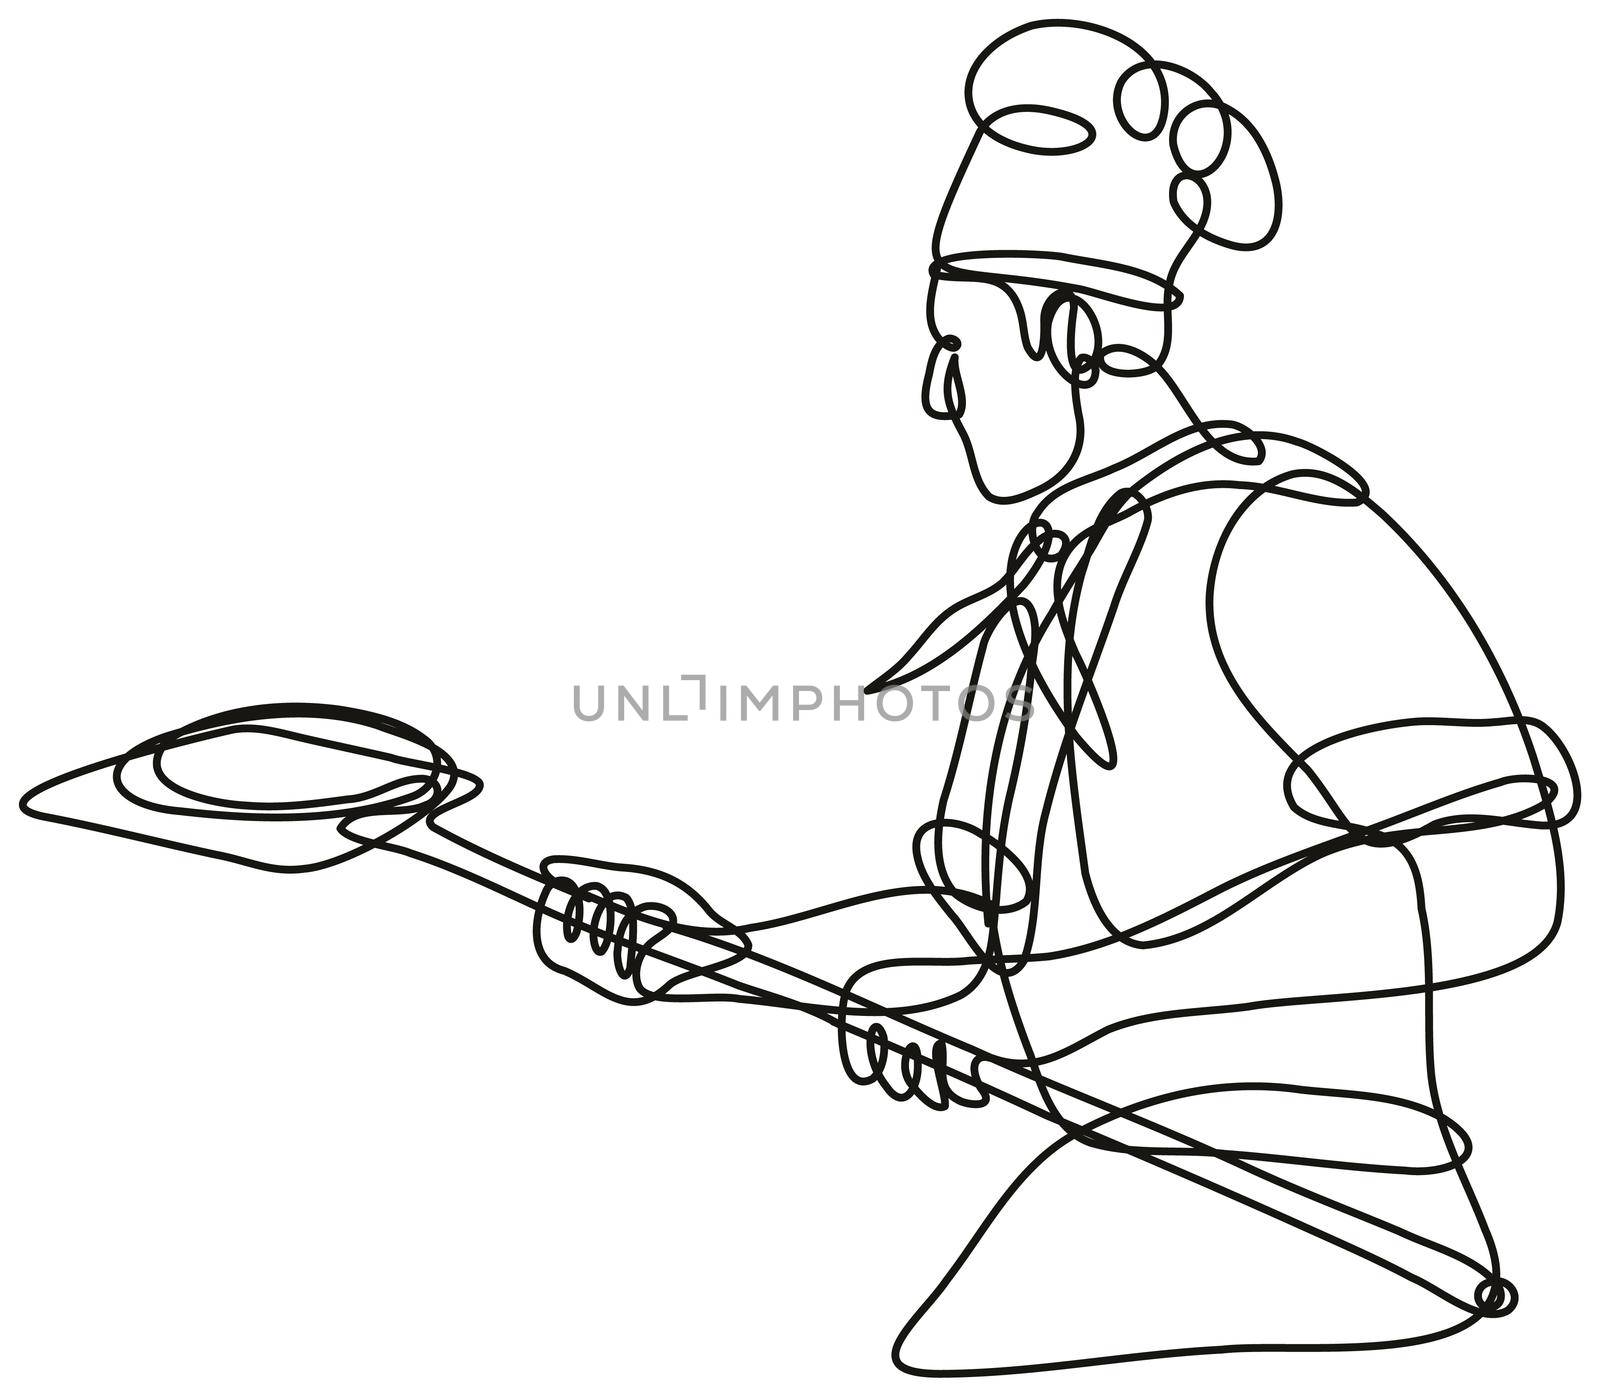 Continuous line drawing illustration of a pizza baker chef or cook holding peel done in mono line or doodle style in black and white on isolated background. 